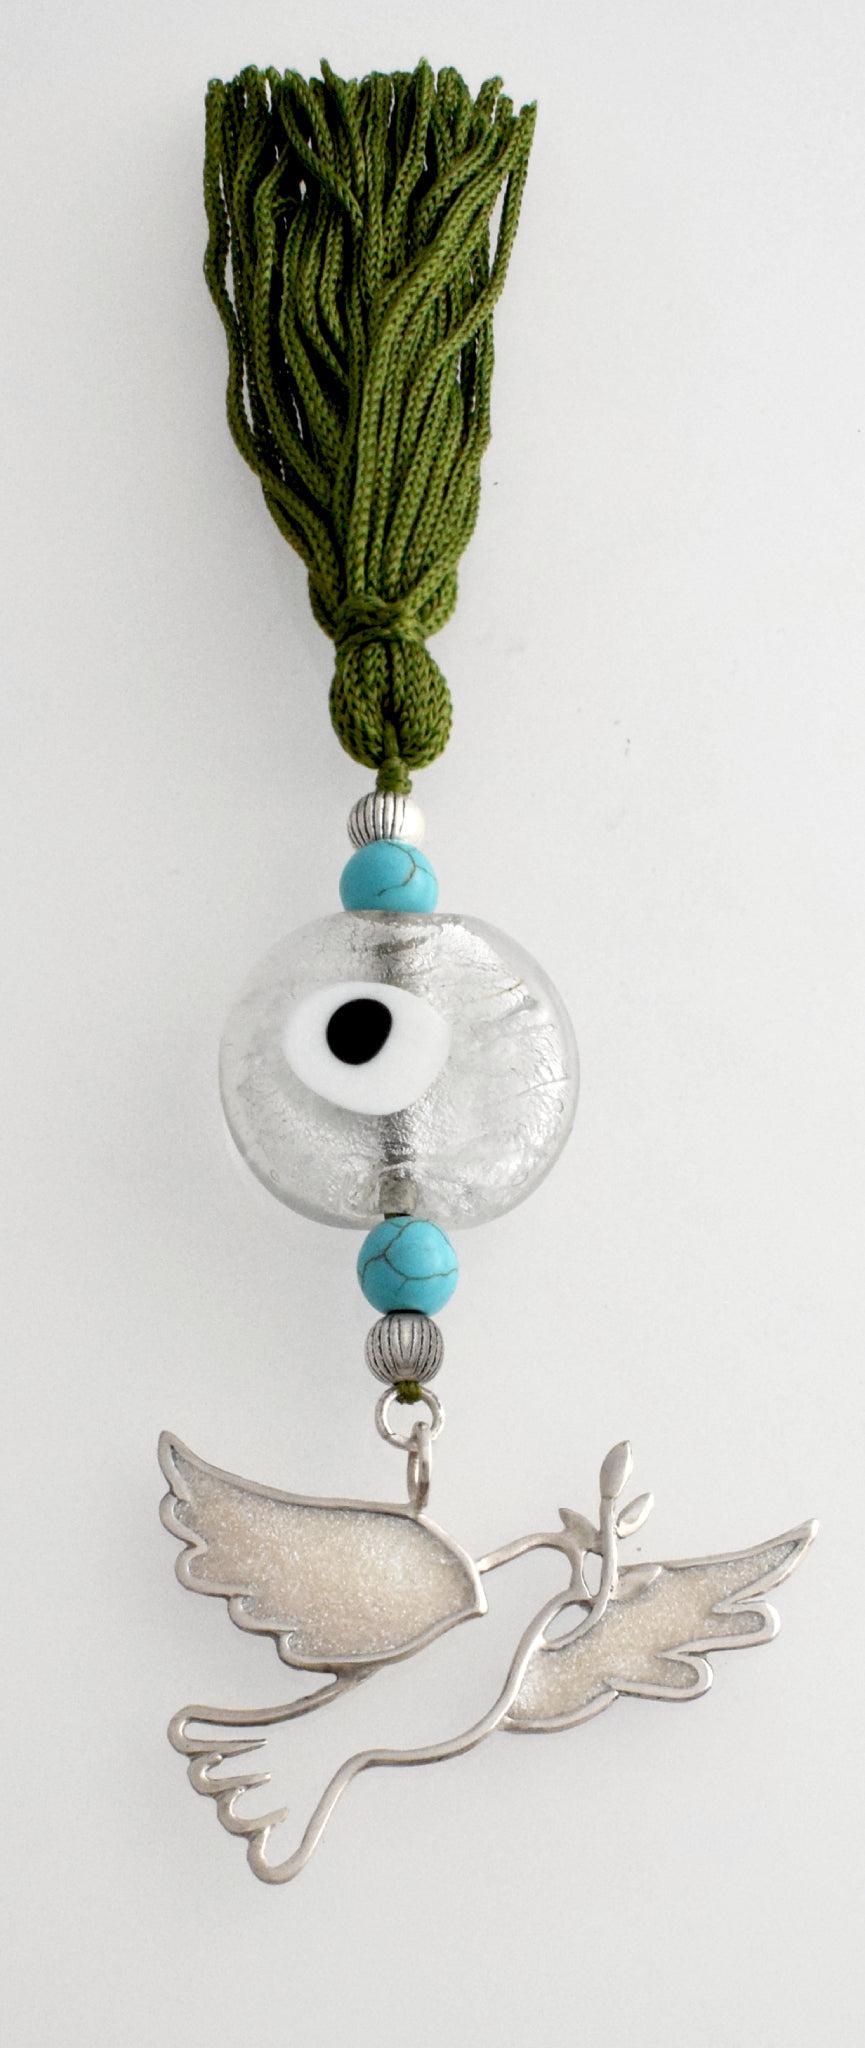 Evil Eye Charm on a tassel, House decoration, holiday decor, welcome gift, silver charm, Dove Charm (GK-25)